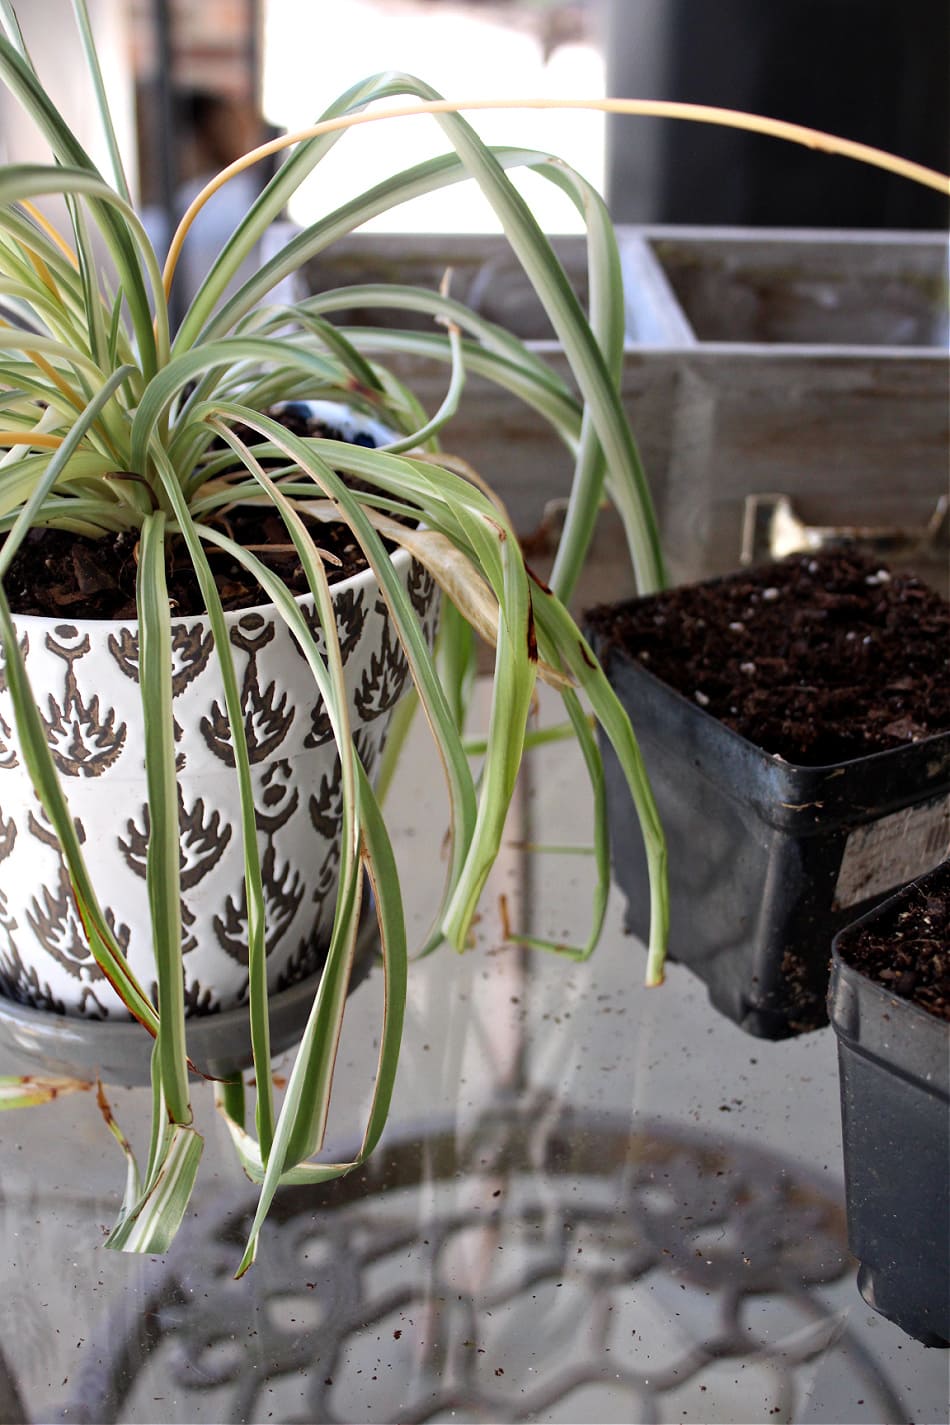 How to Care About Snake Plants
